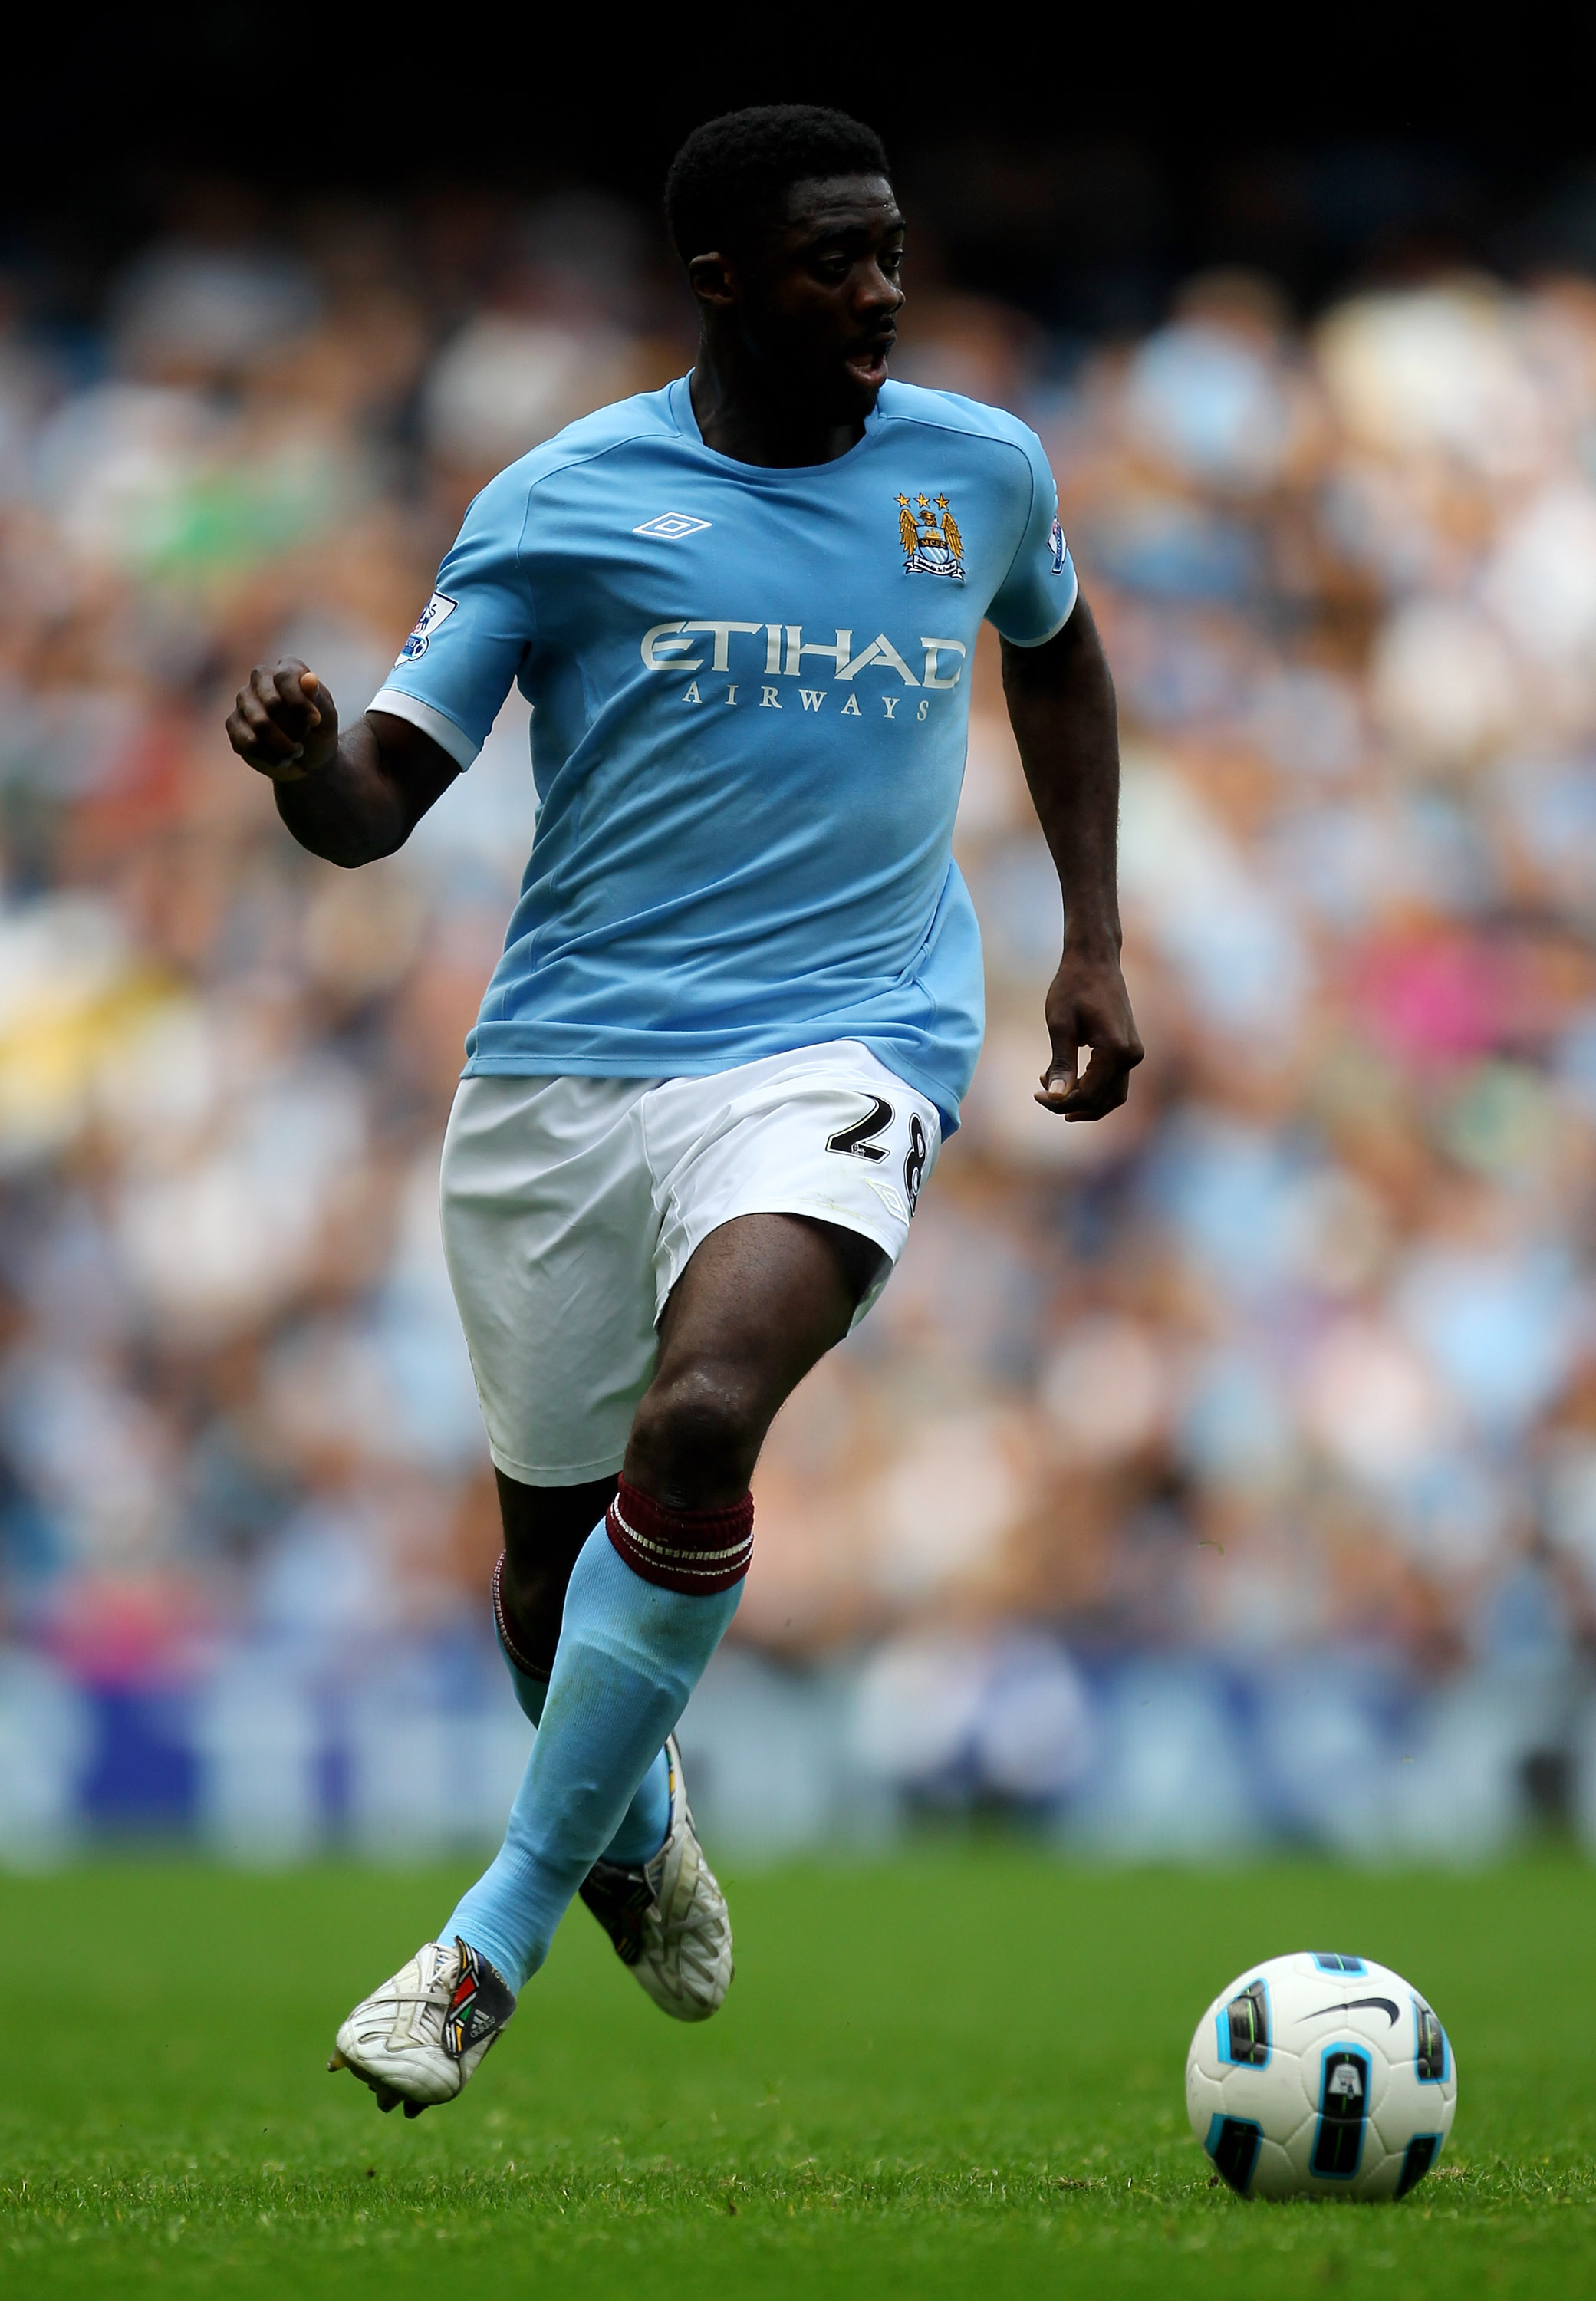 MANCHESTER, ENGLAND - SEPTEMBER 11:  Kolo Toure of Manchester City in action during the Barclays Premier League match between Manchester City and Blackburn Rovers at the City of Manchester Stadium on September 11, 2010 in Manchester, England.  (Photo by A